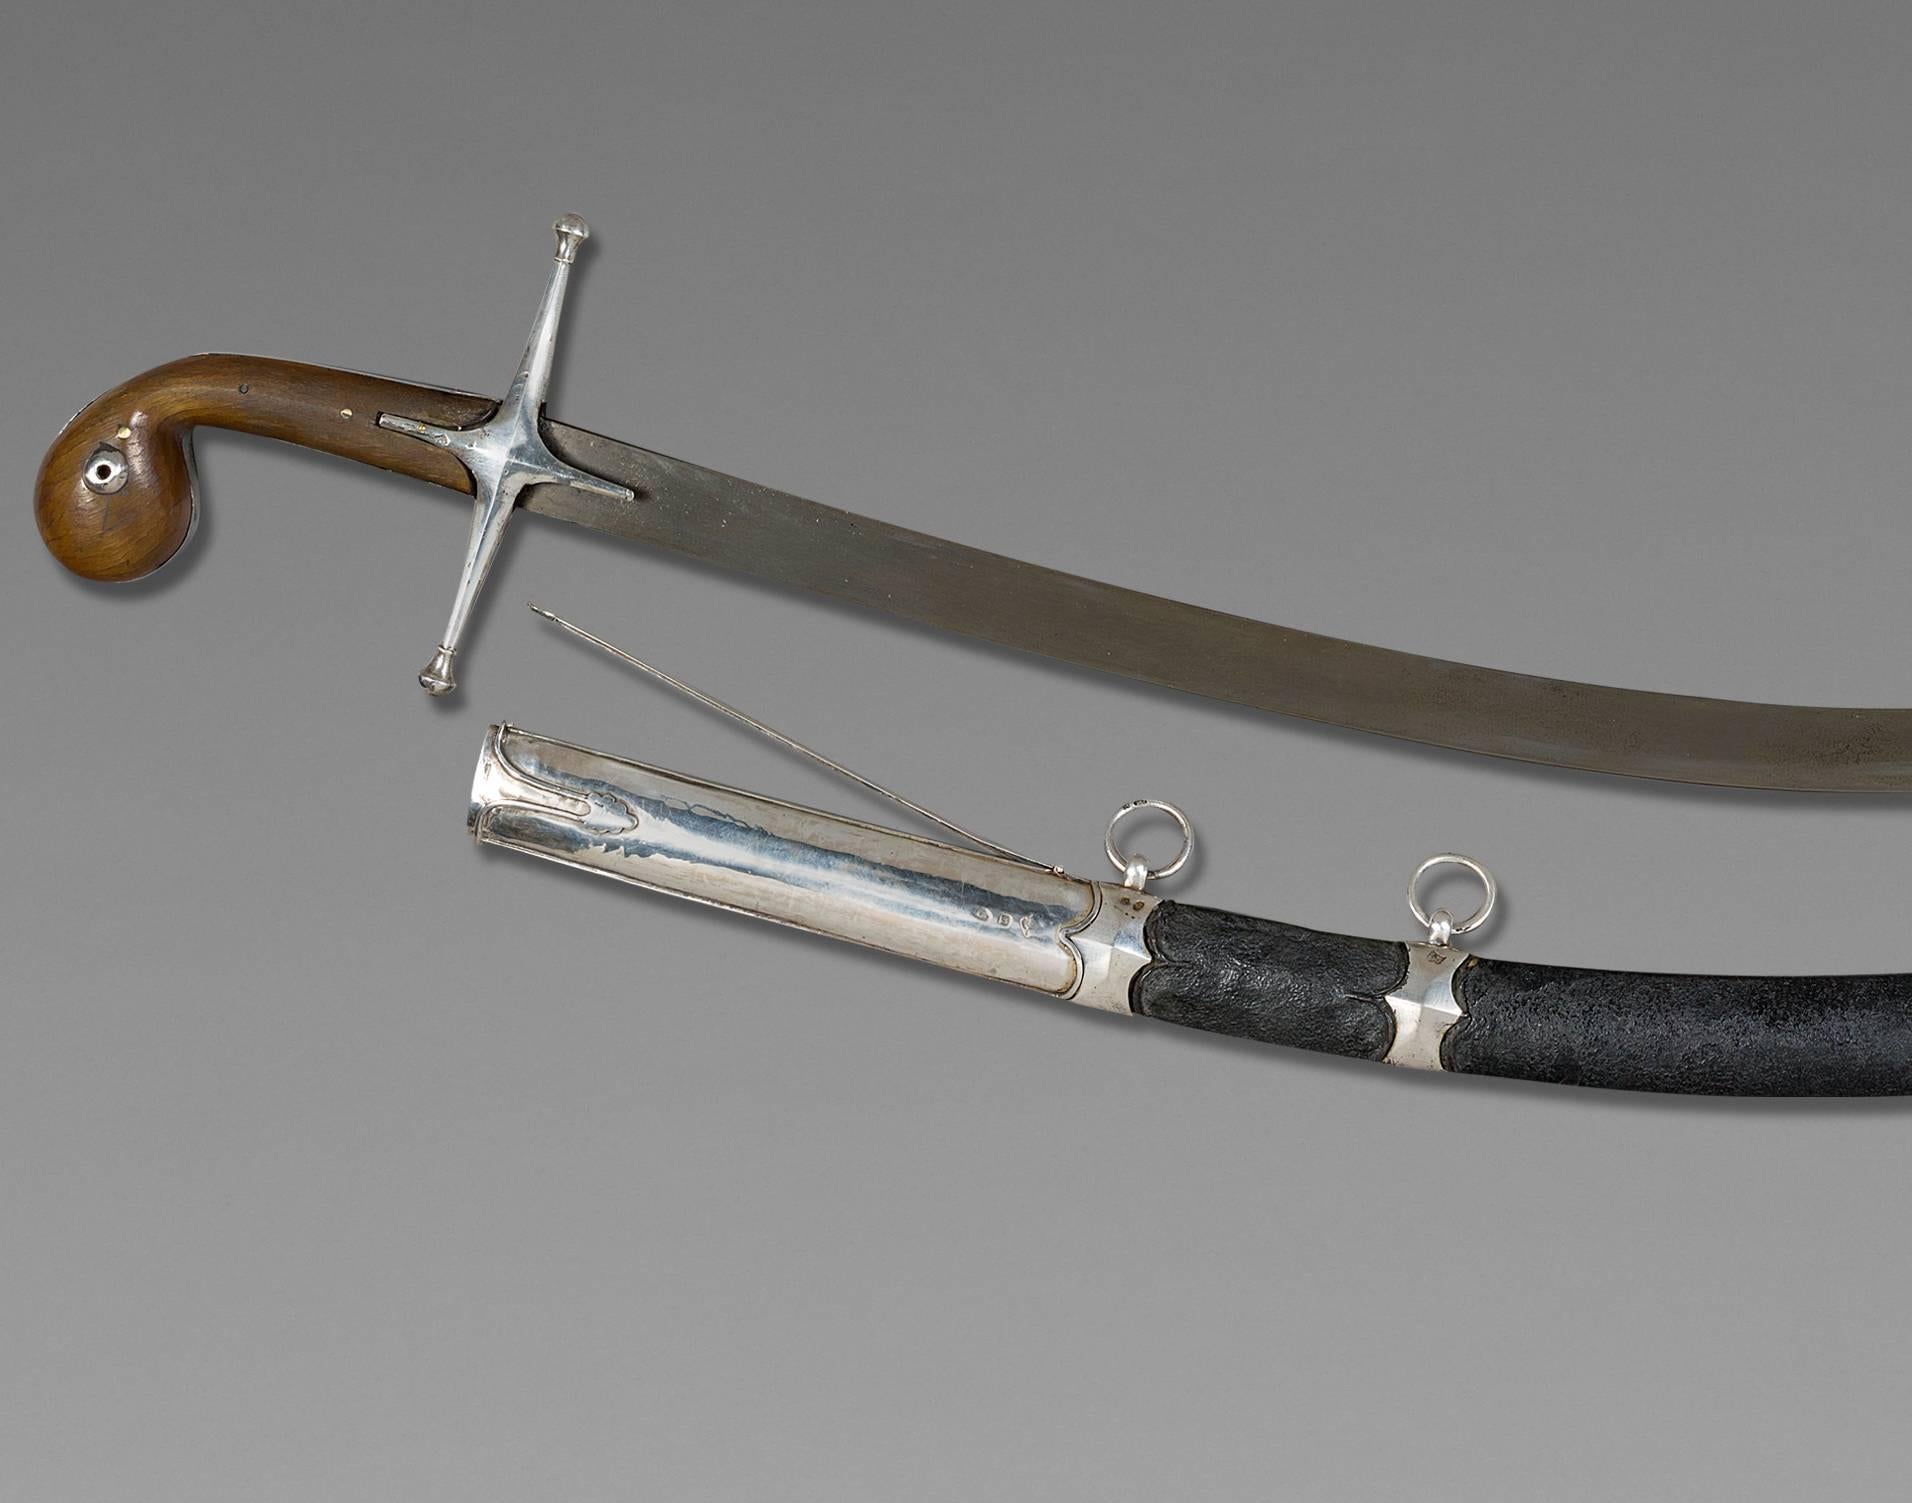 Oriental saber, also called Shamshir
Ottoman Empire, late 18th century 

Handle in horn, silver mounted, Damascus blade, scabbard garnished of black leather.

Dimensions
Whole saber: 42